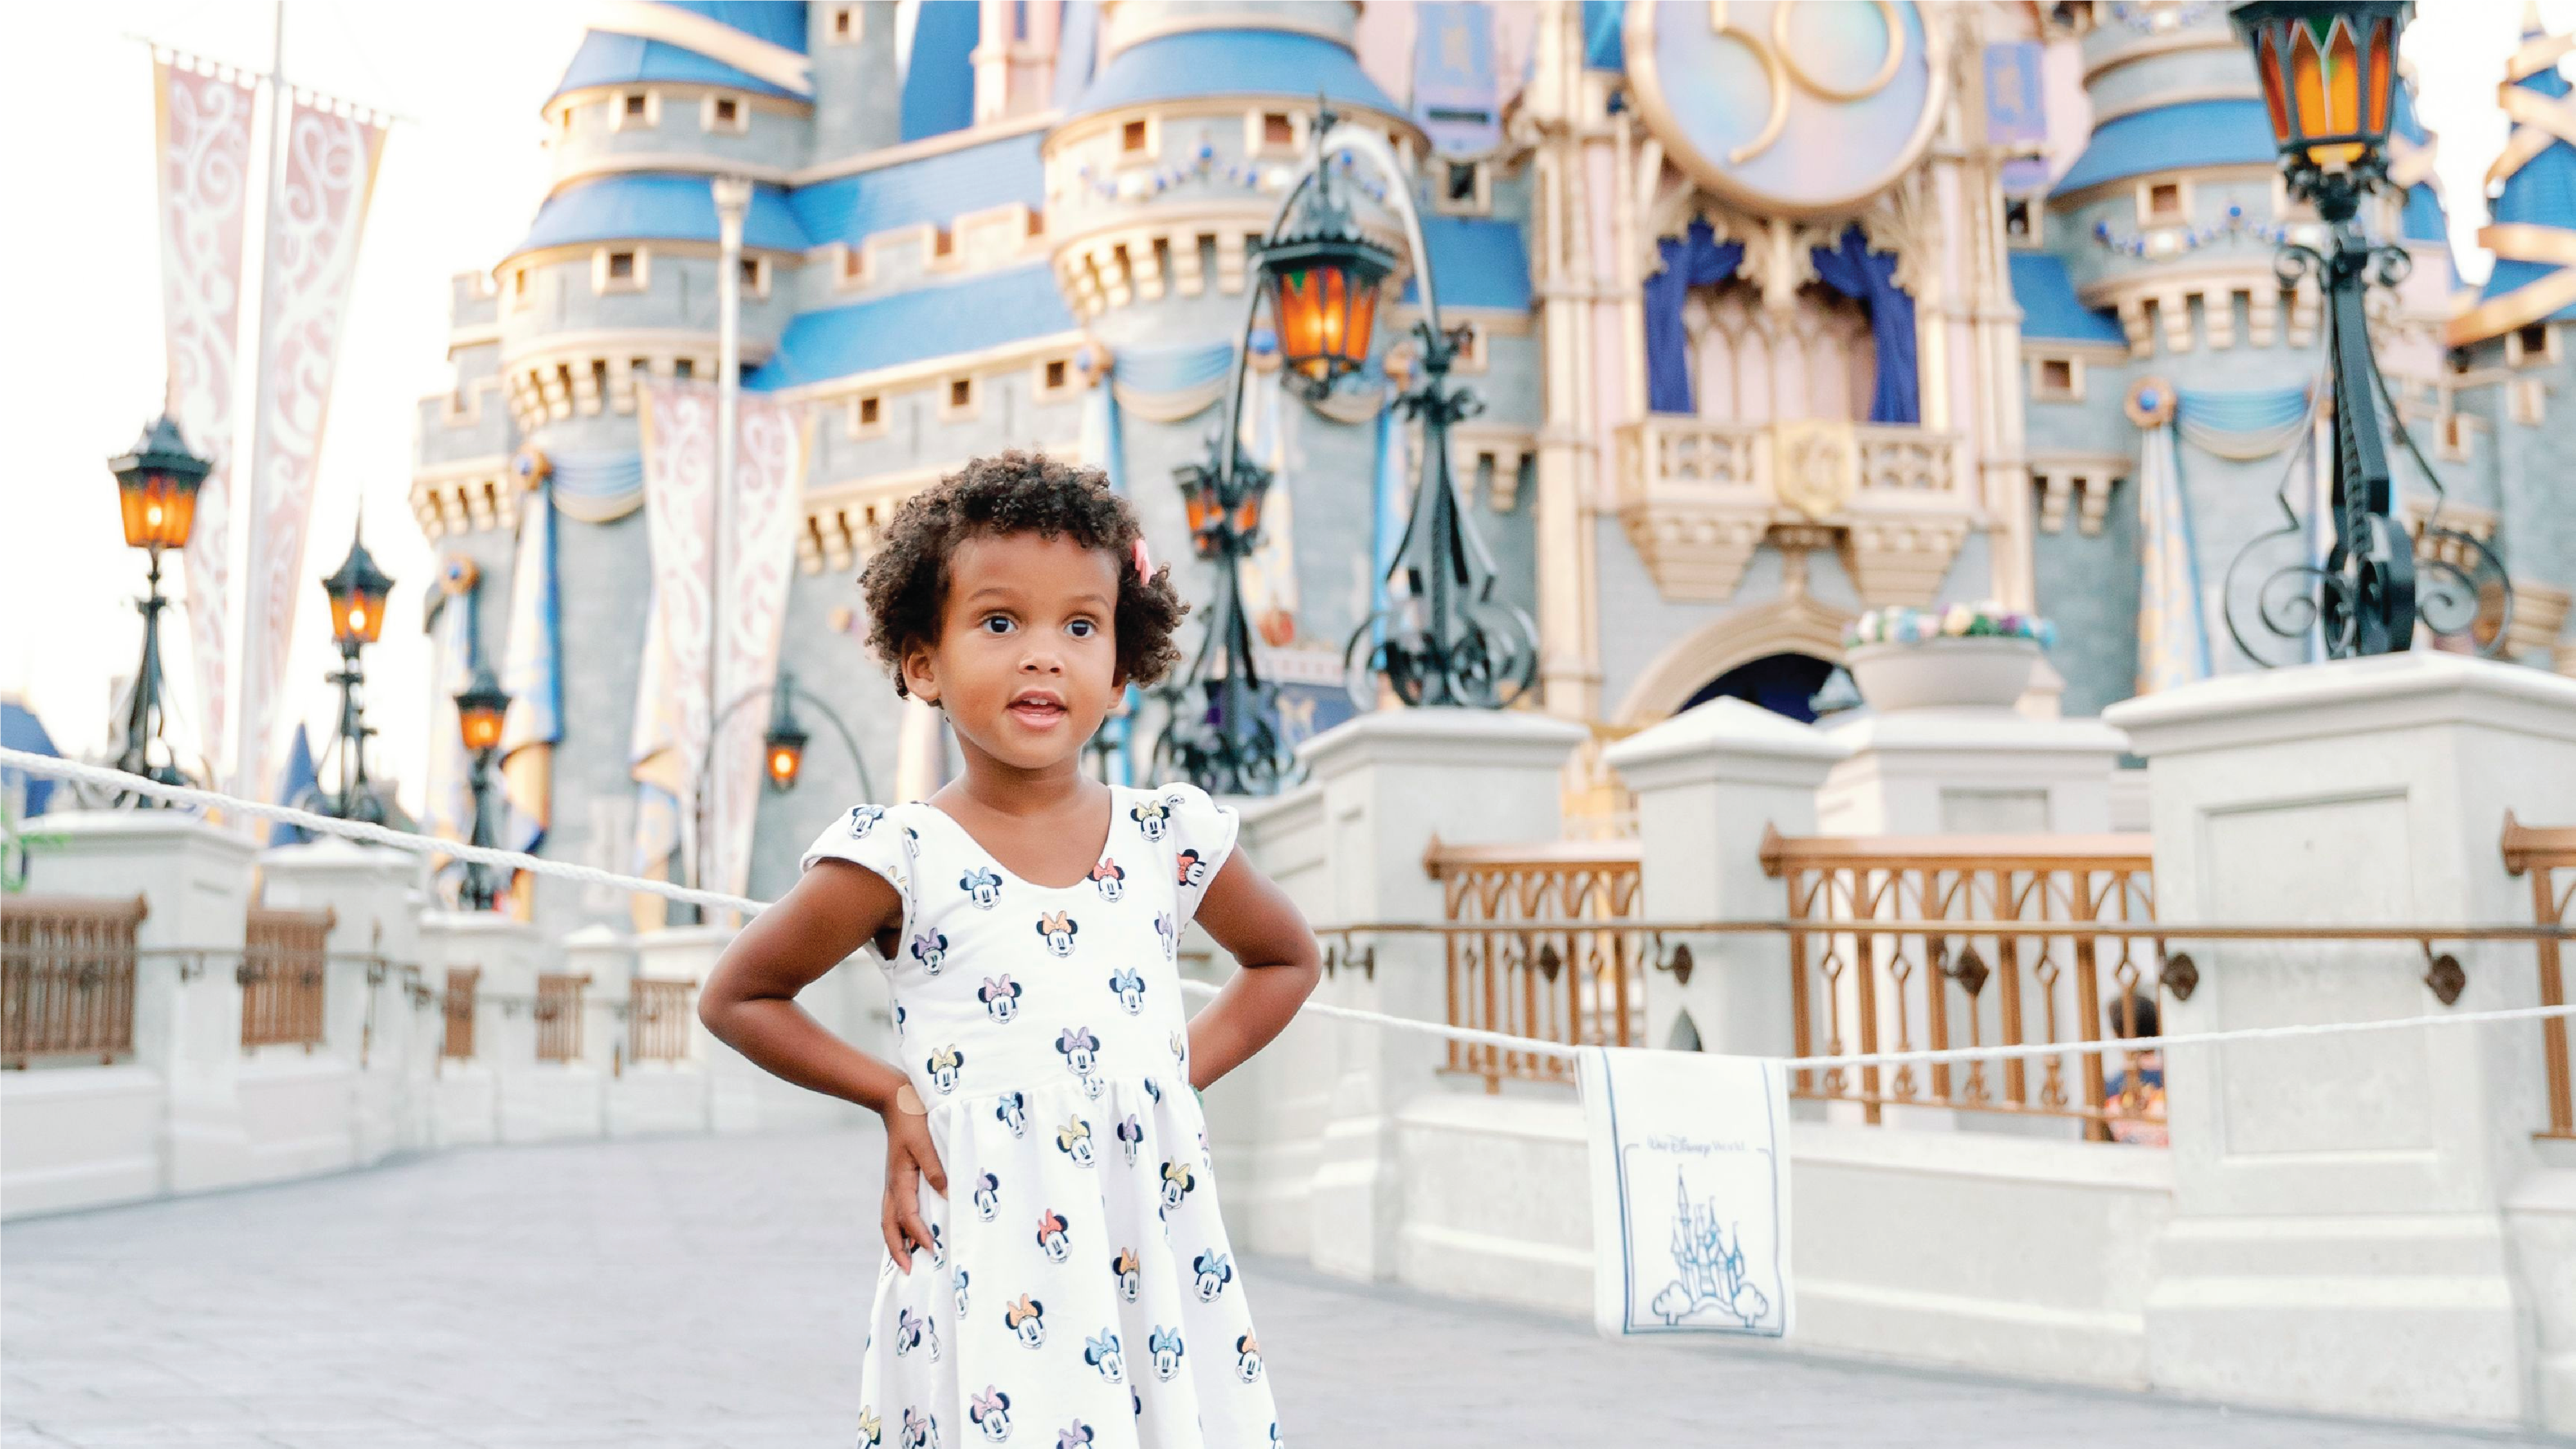 A Day at Disney's Magic Kingdom: Top Places to Visit with Little Ones